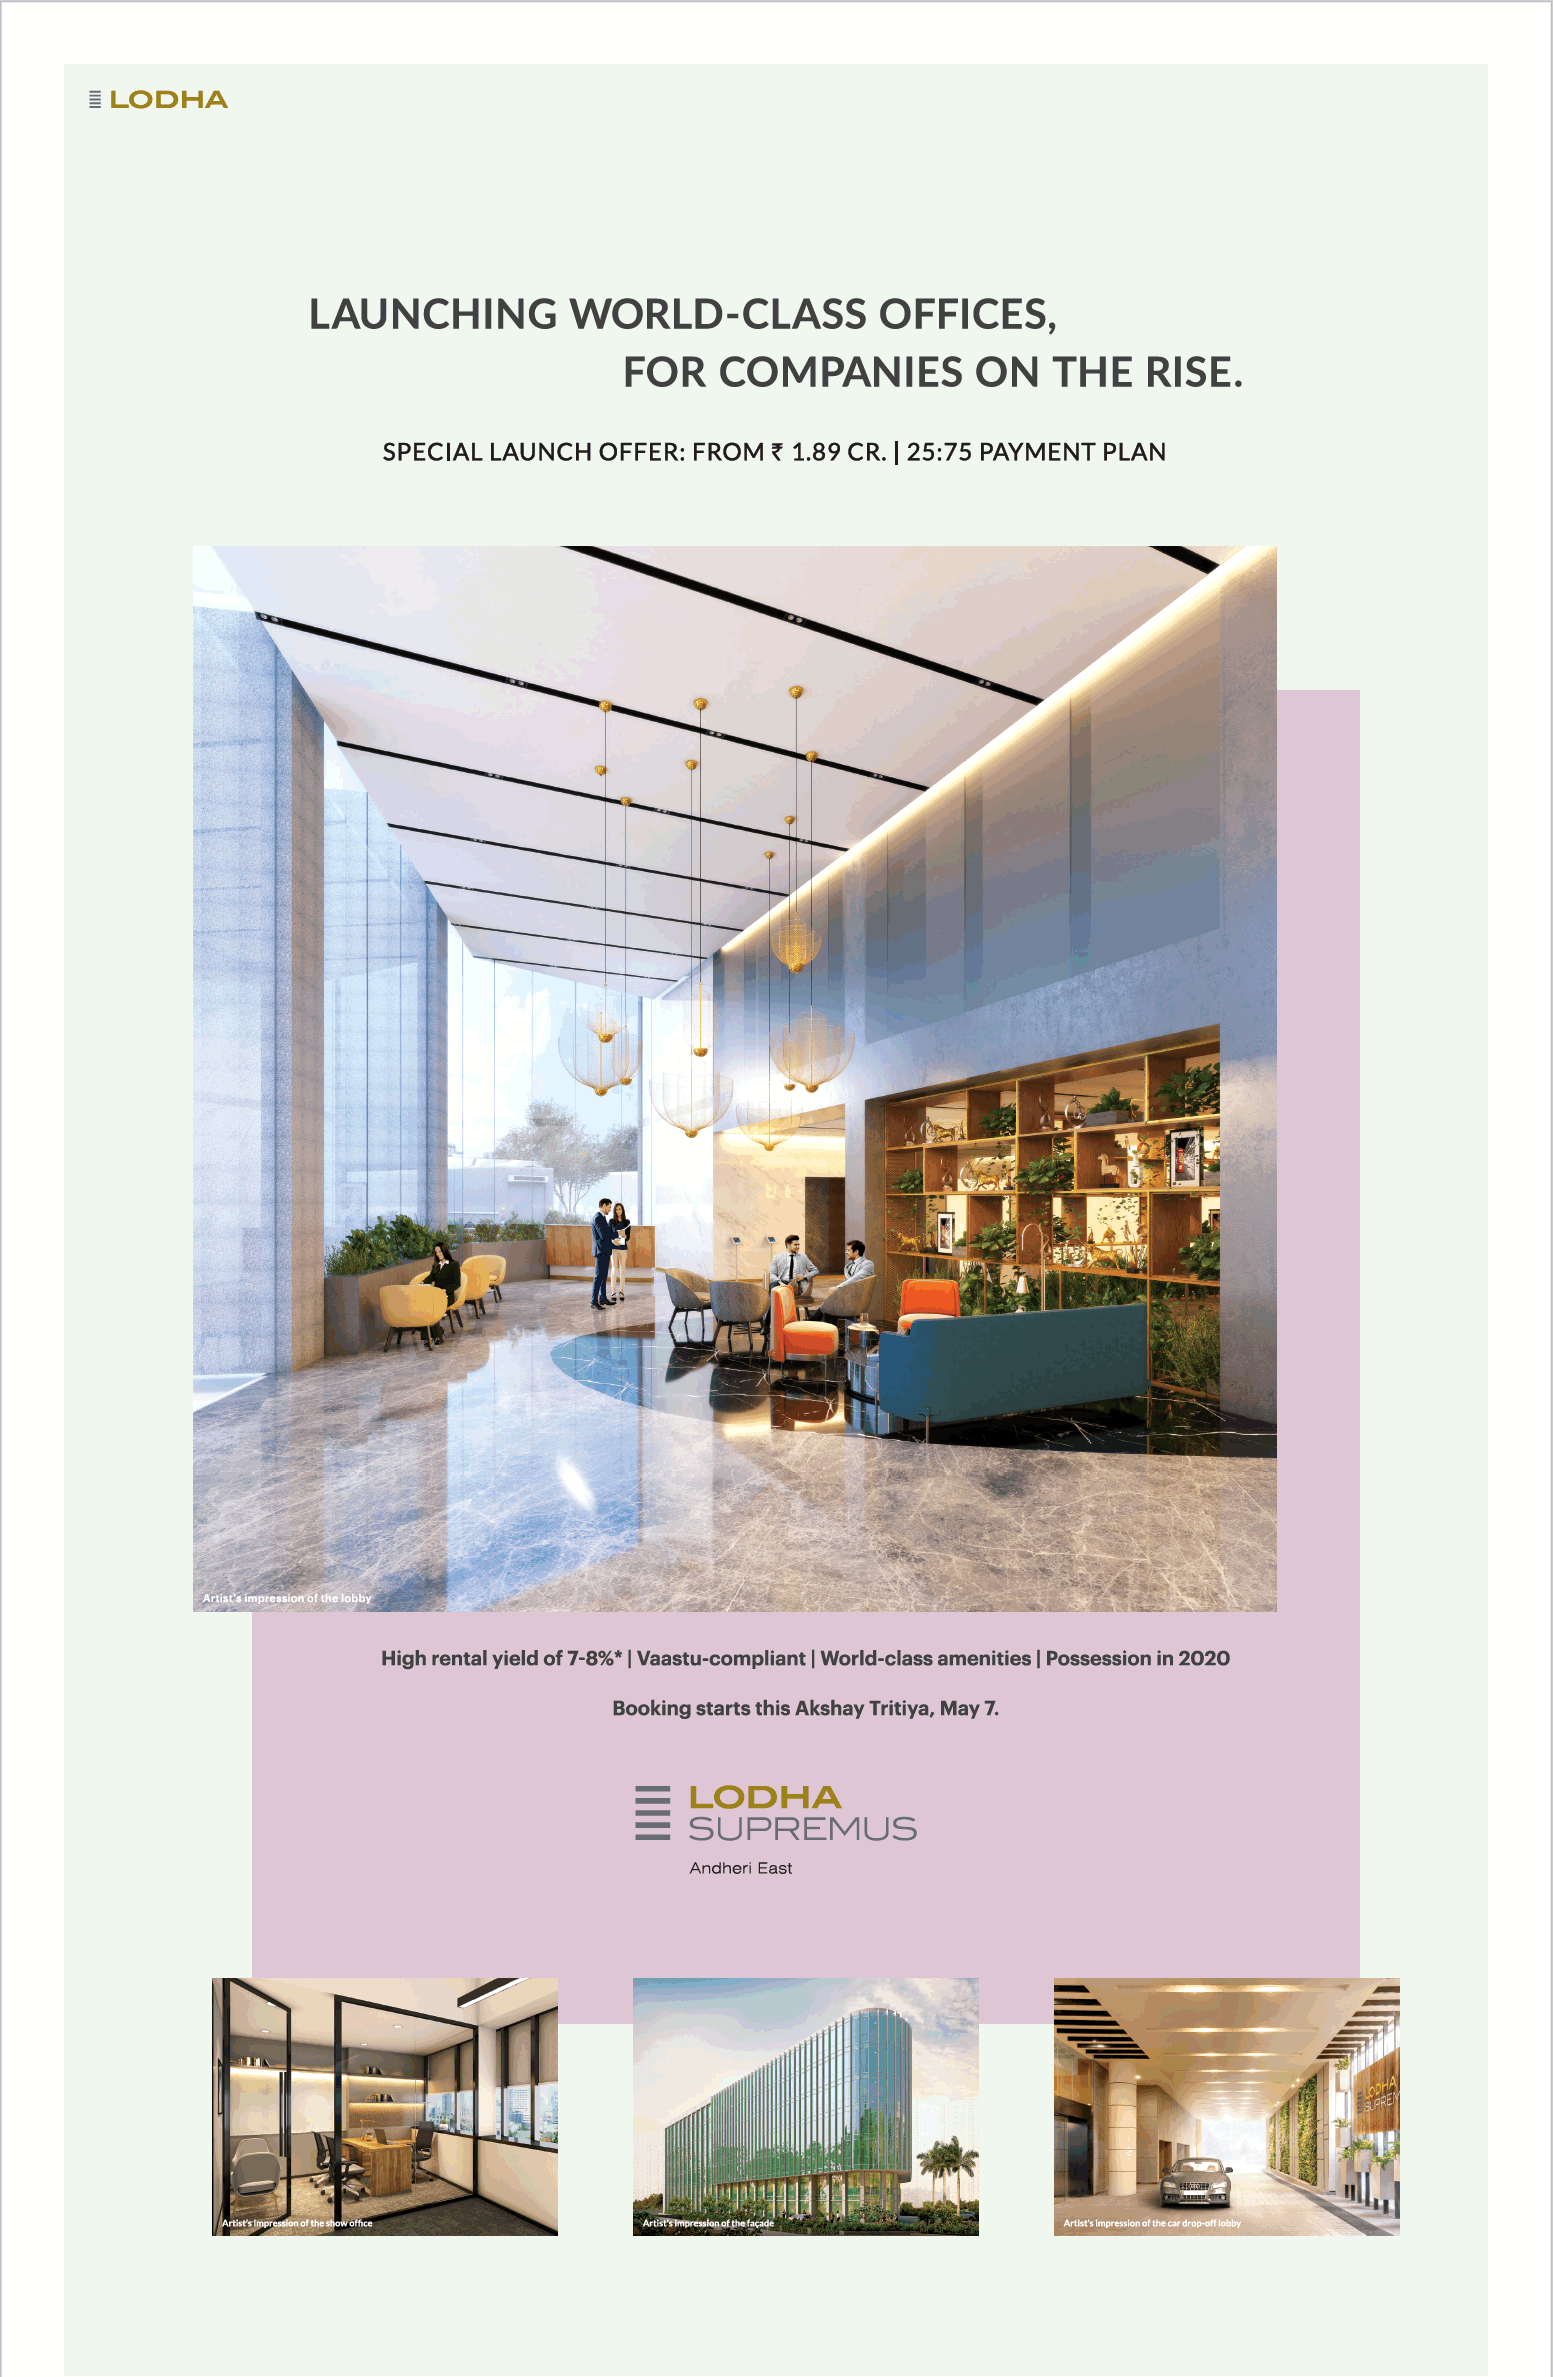 Avail special launch offer from Rs. 1.89 Cr. at Lodha Supremus in Mumbai